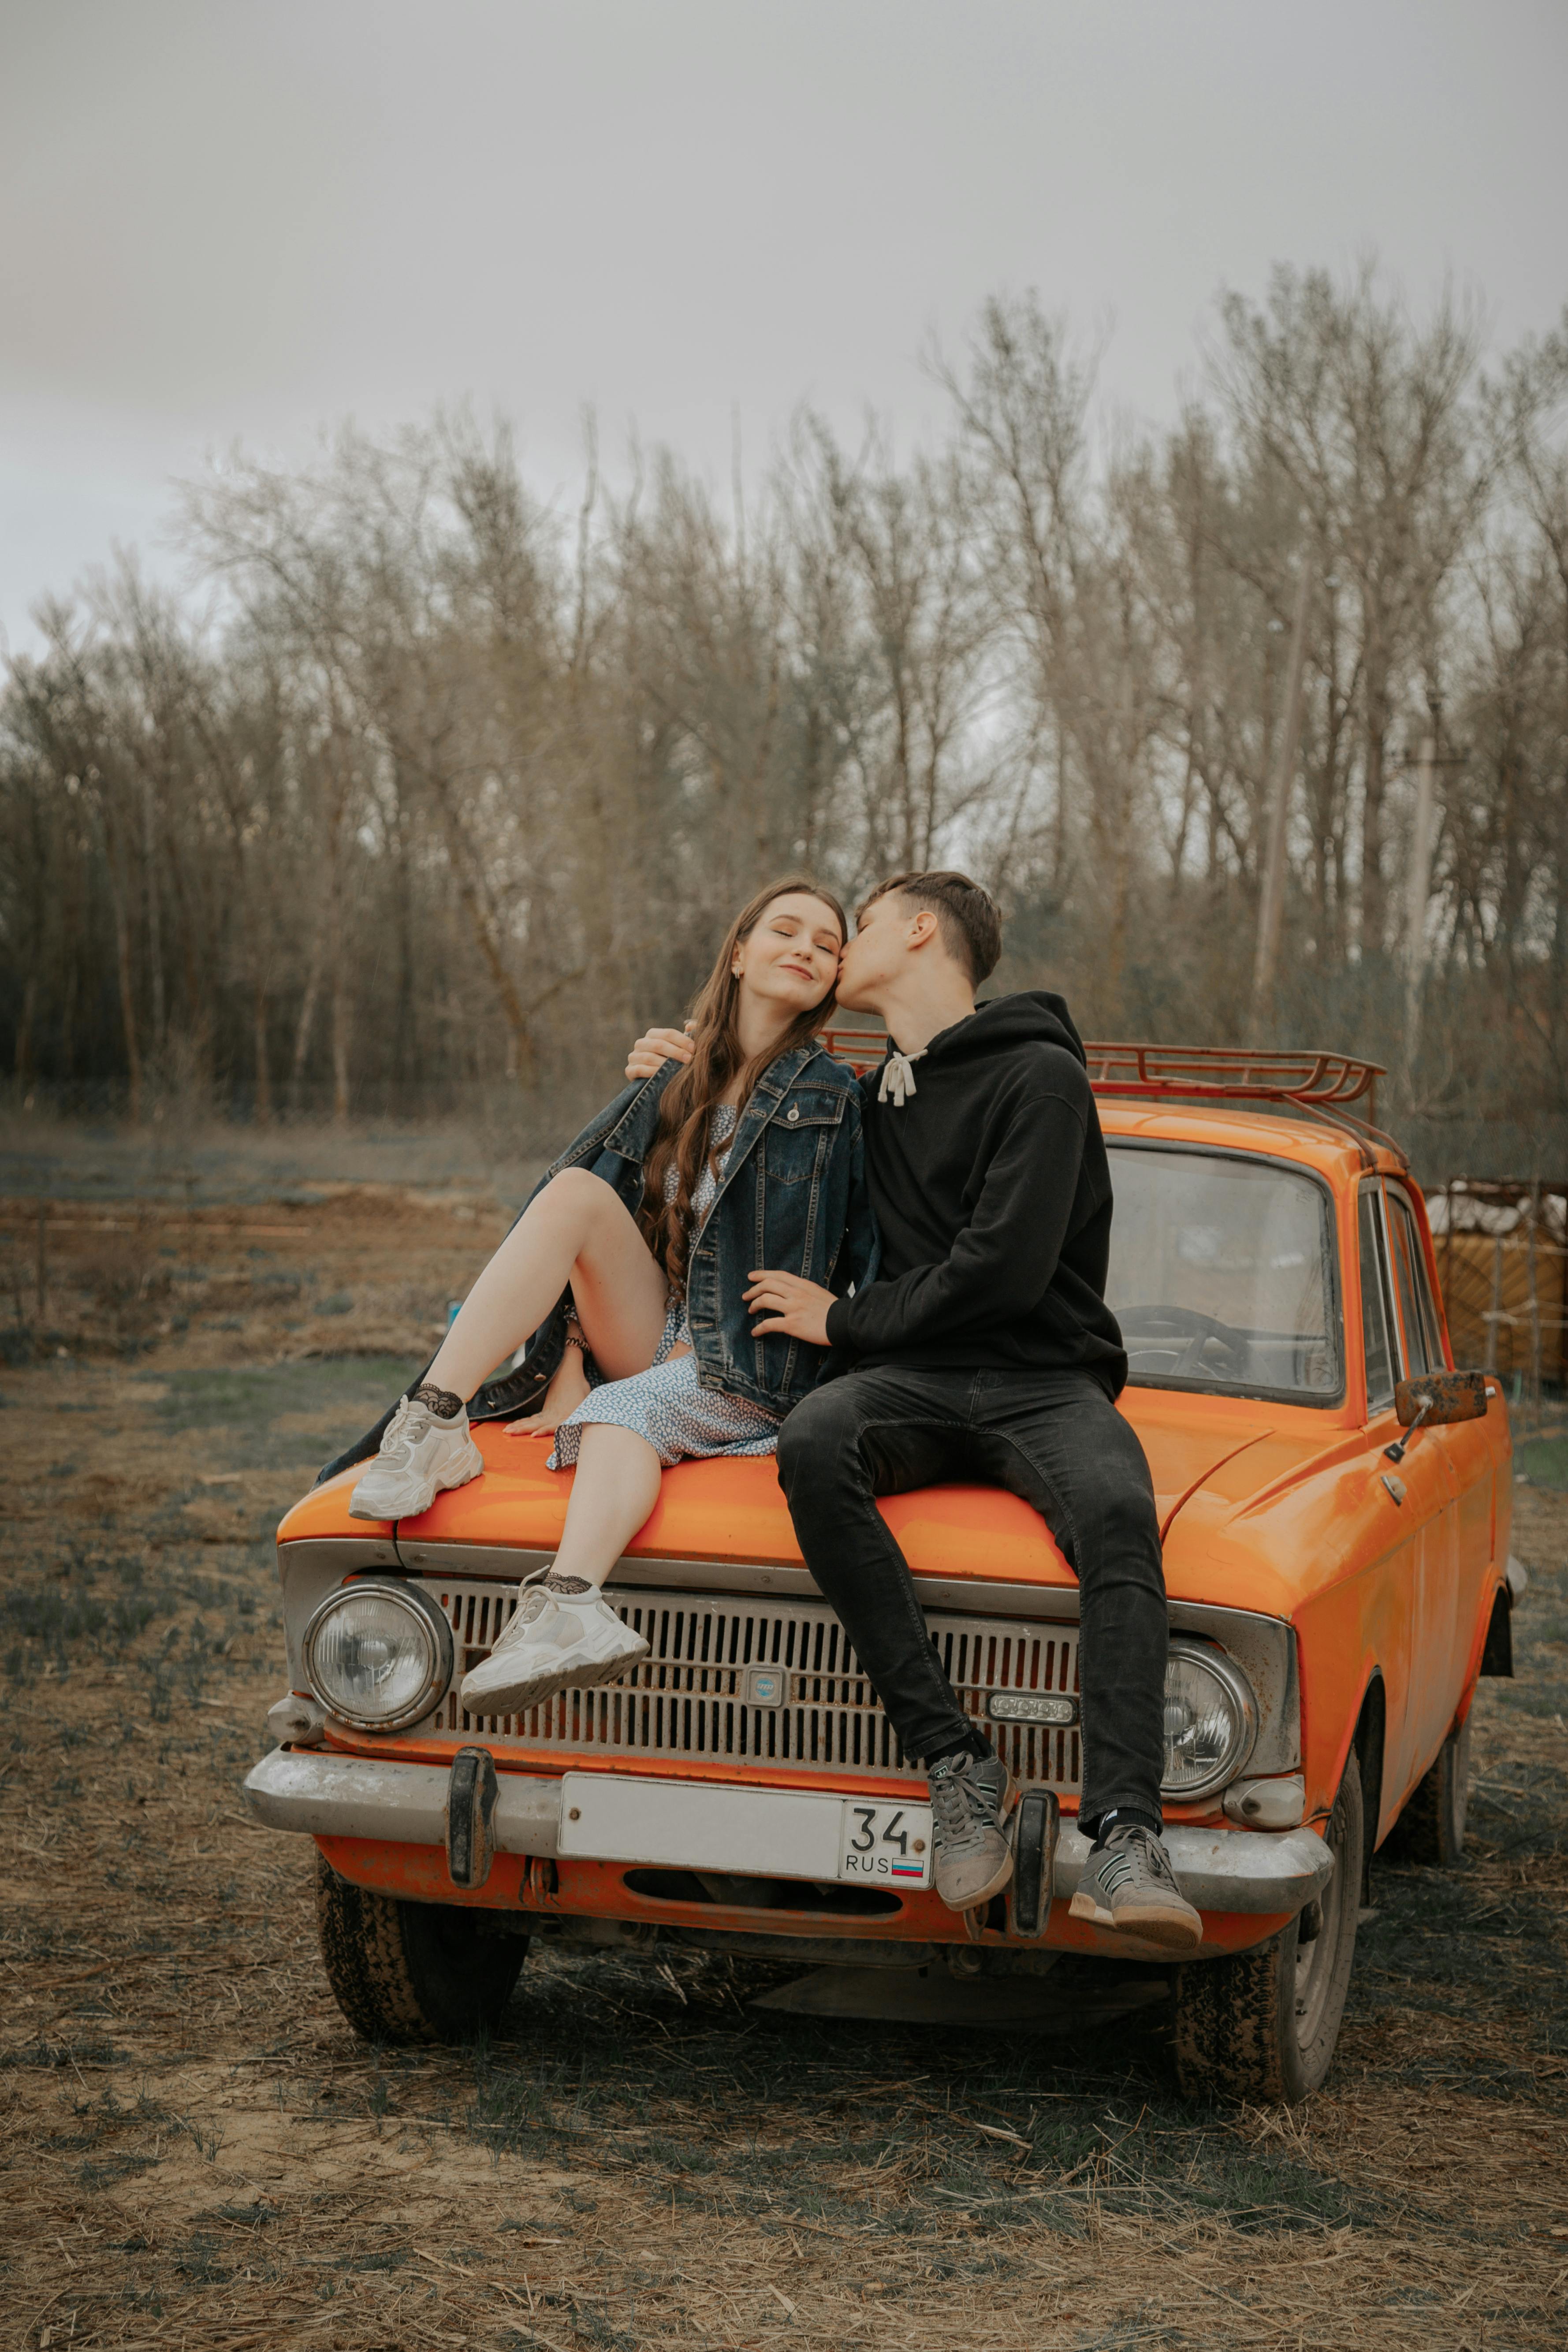 cool couple embracing on old car in autumn countryside